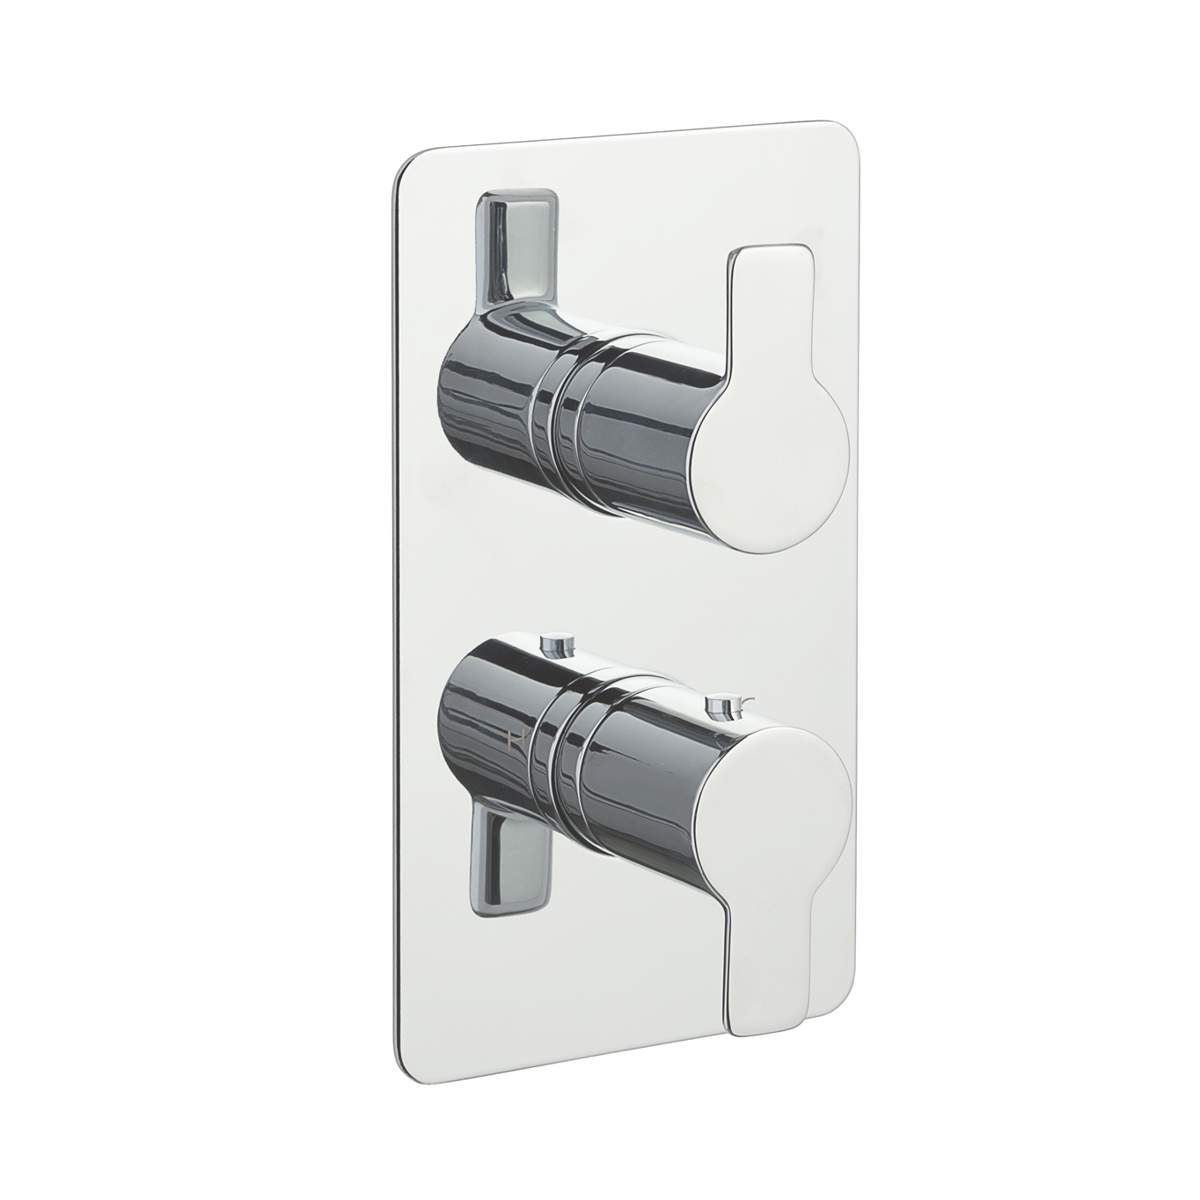 JTP Amore 2 Outlet Thermostat (79671)